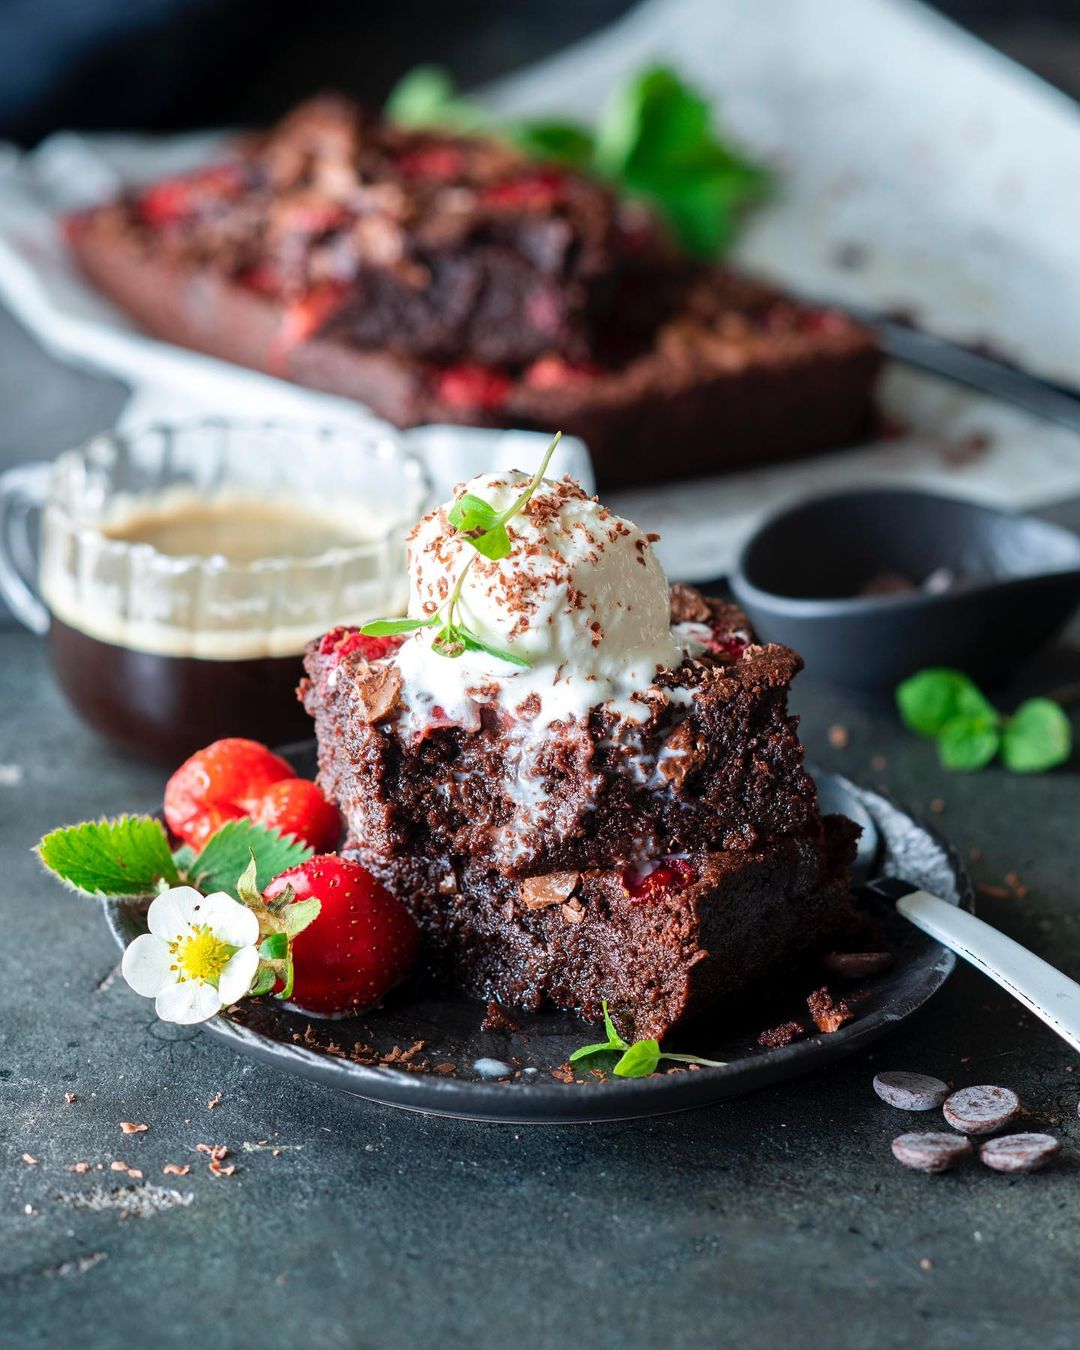 Super easy chocolate brownies with strawberries